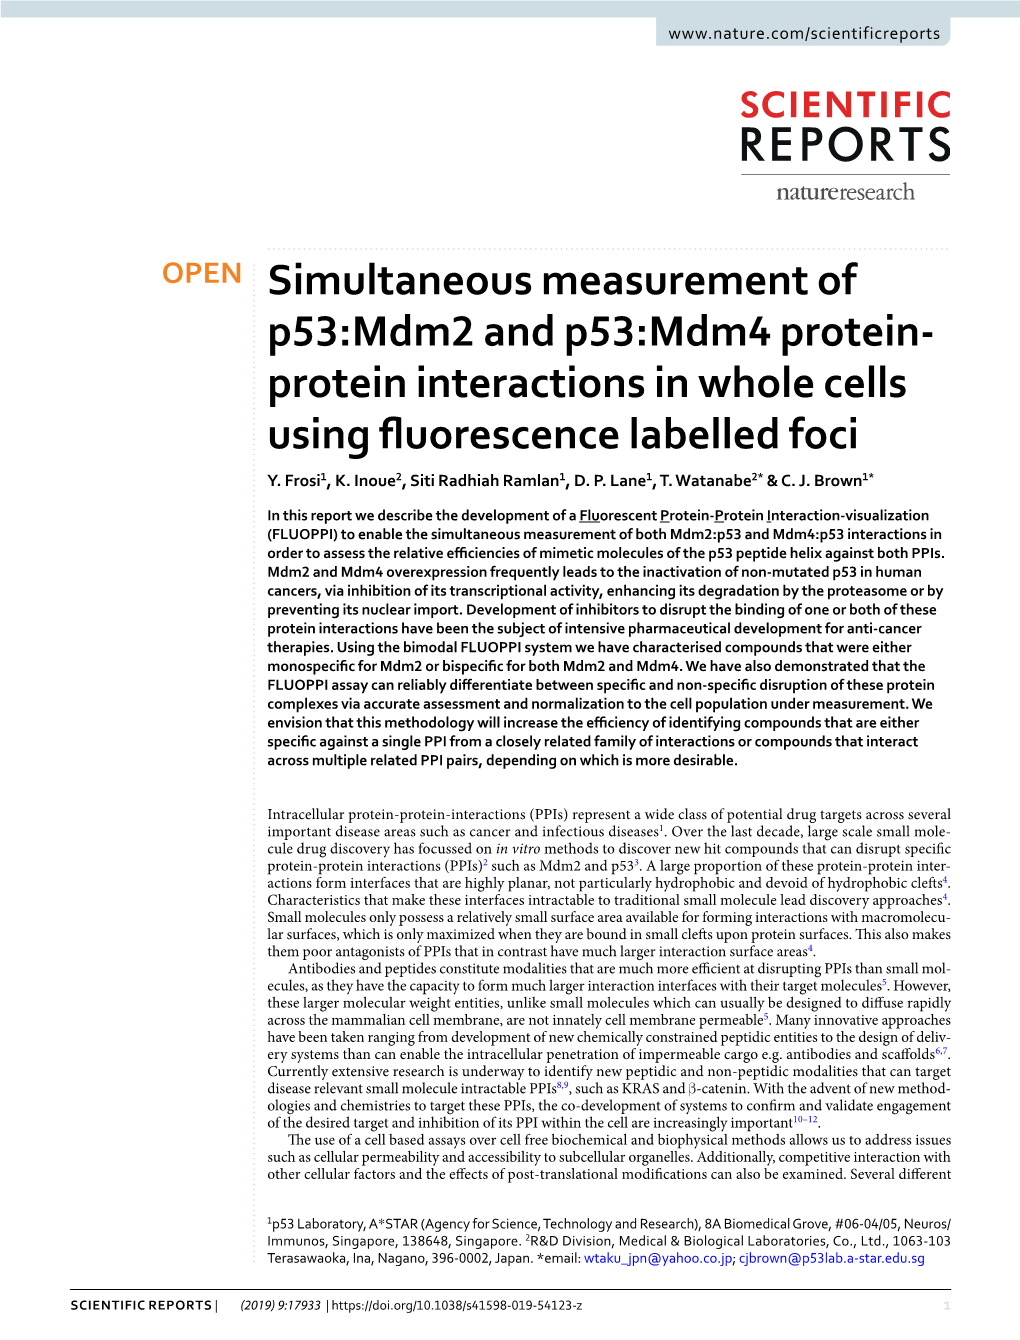 Simultaneous Measurement of P53:Mdm2 and P53:Mdm4 Protein- Protein Interactions in Whole Cells Using Fuorescence Labelled Foci Y